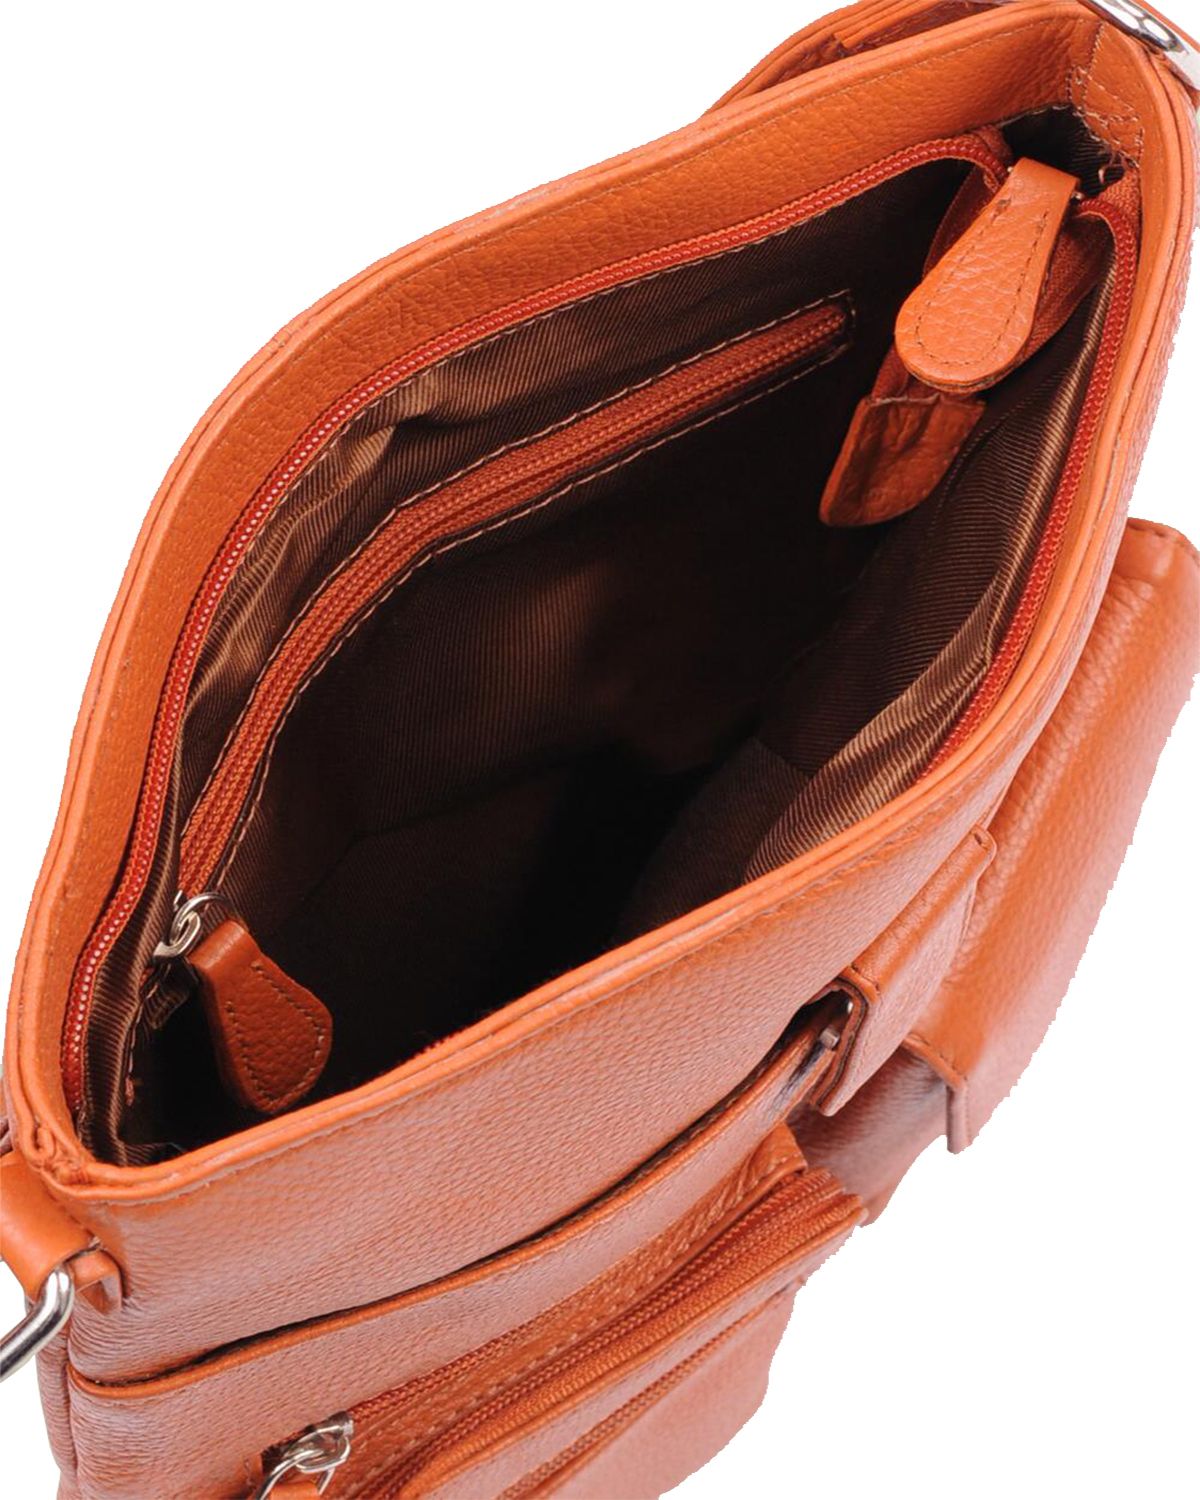 Women's Two Front Pockets Crossbody Tan Brown Real Leather Bag by SCIN